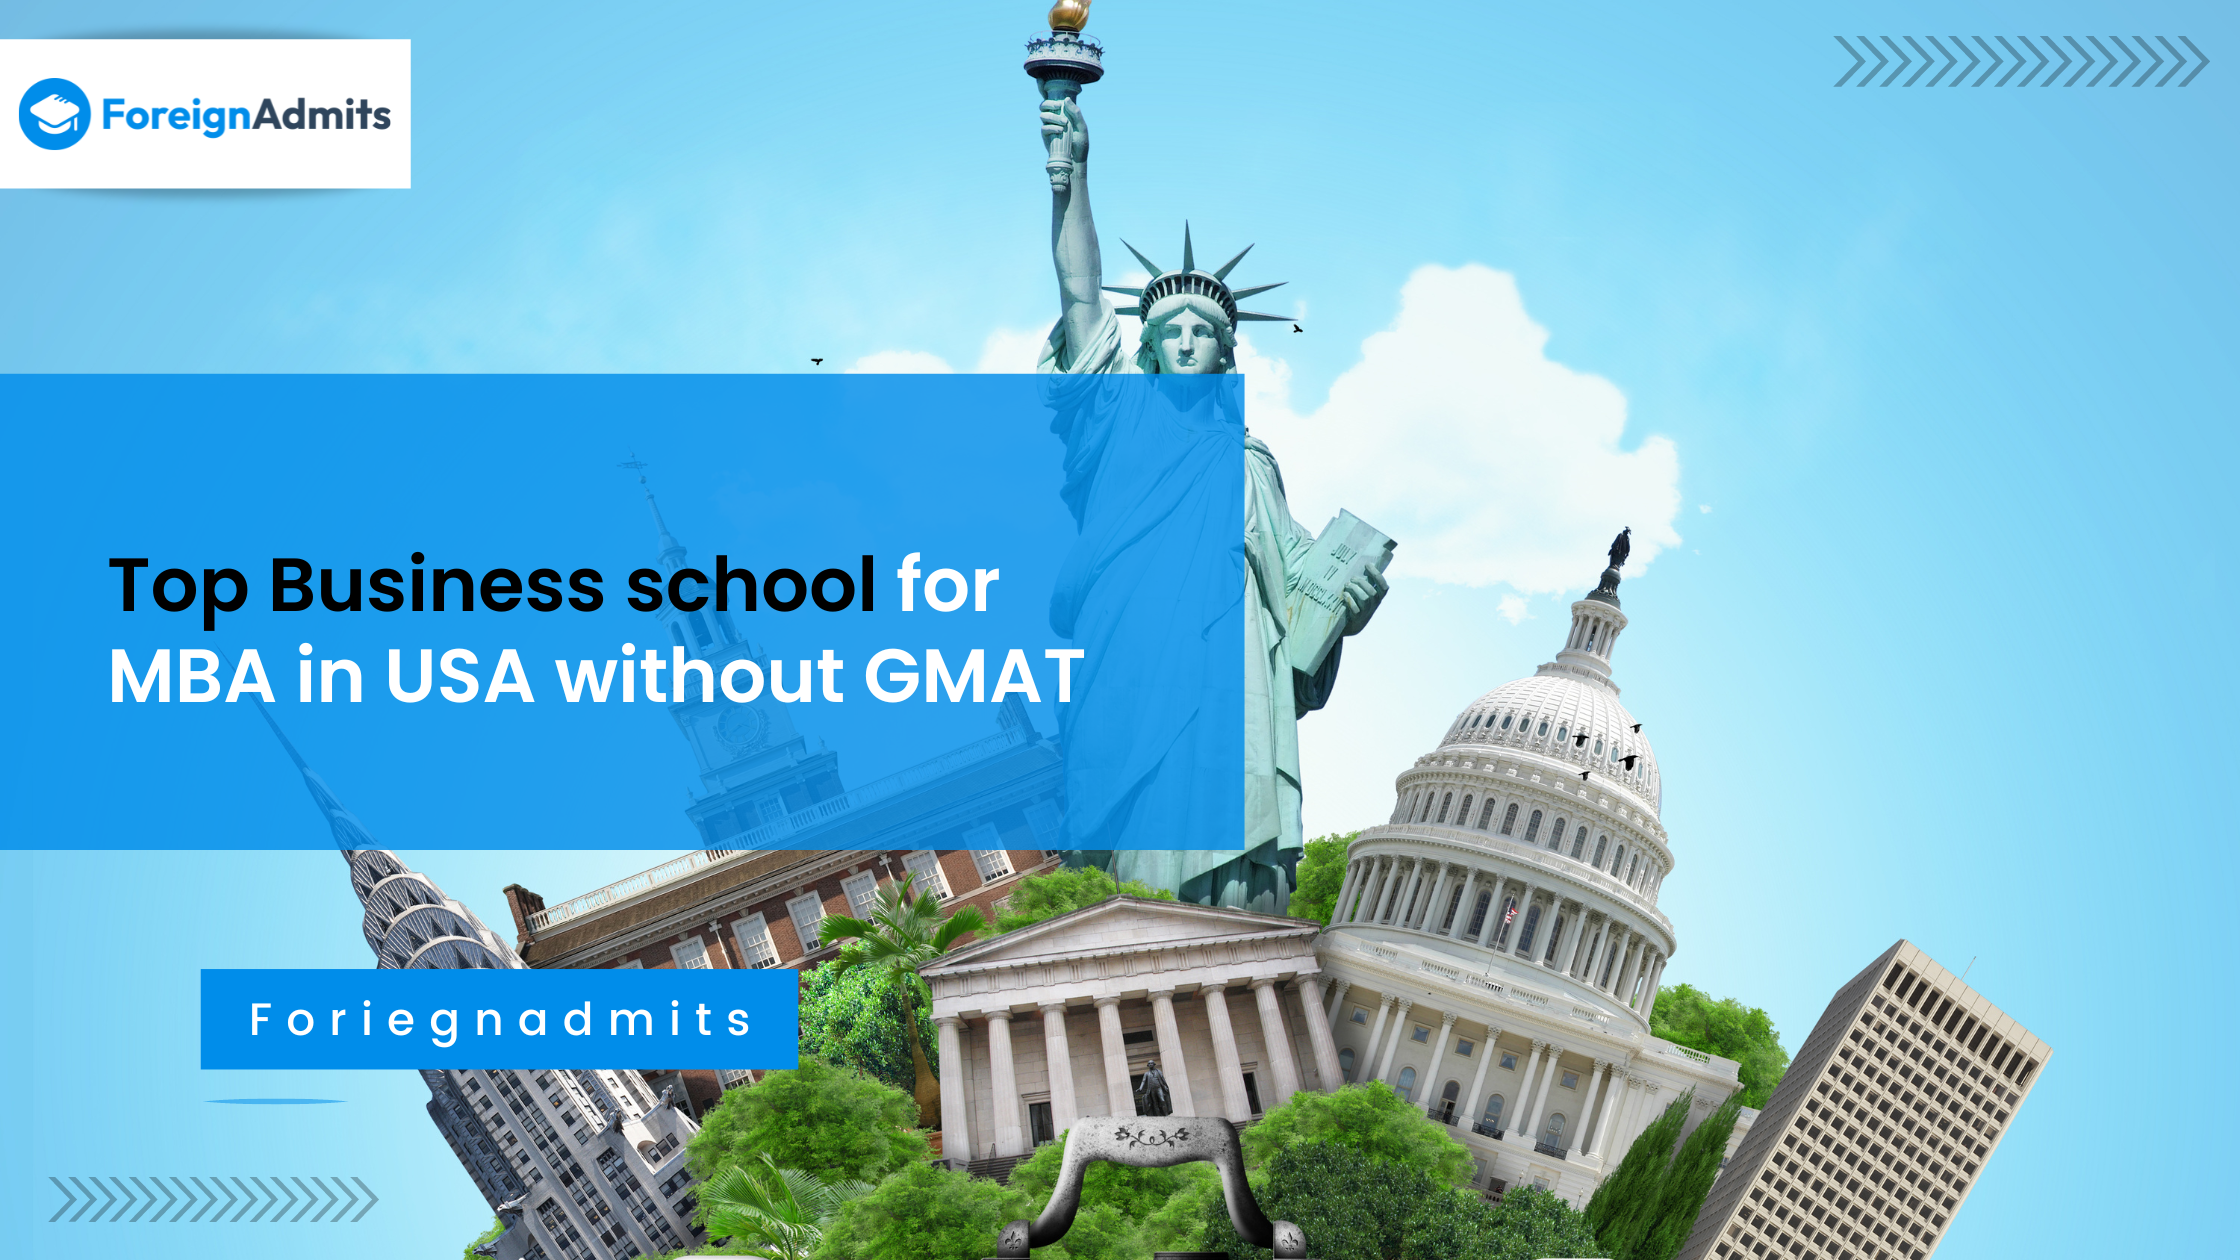 Top Business school for MBA without GMAT in USA